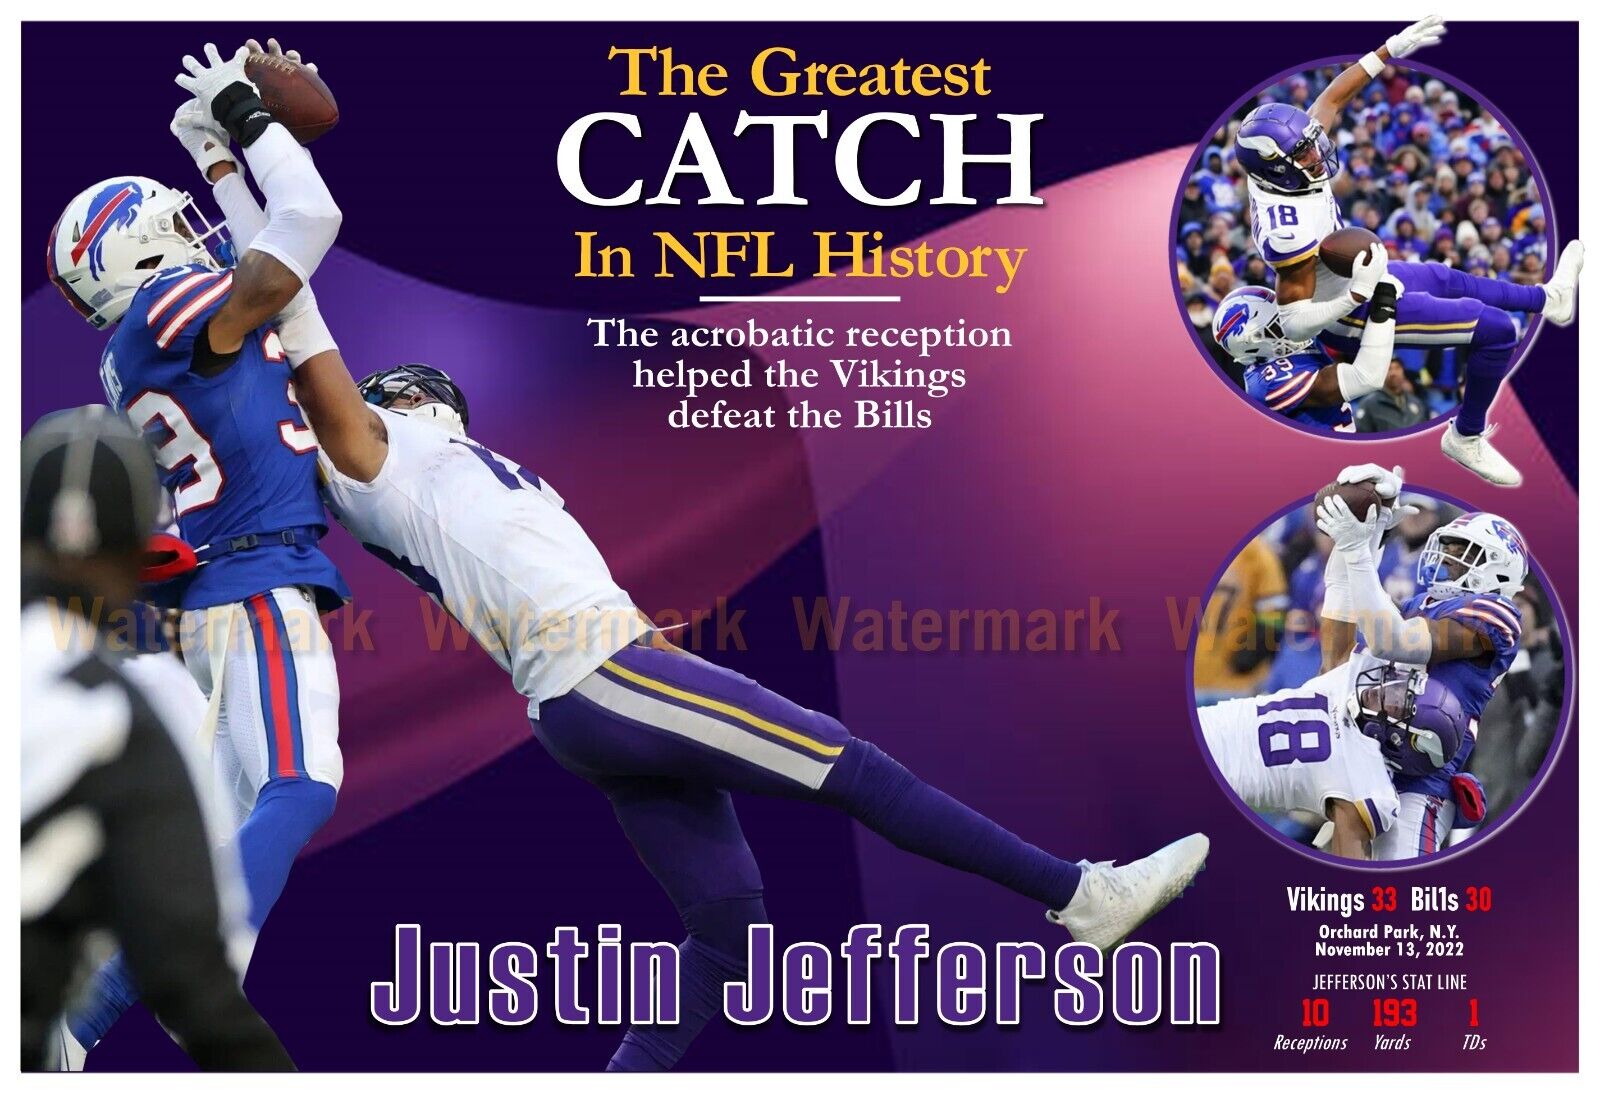 JUSTIN JEFFERSON MAKES GREATEST CATCH IN NFL HISTORY 19”x13” POSTER